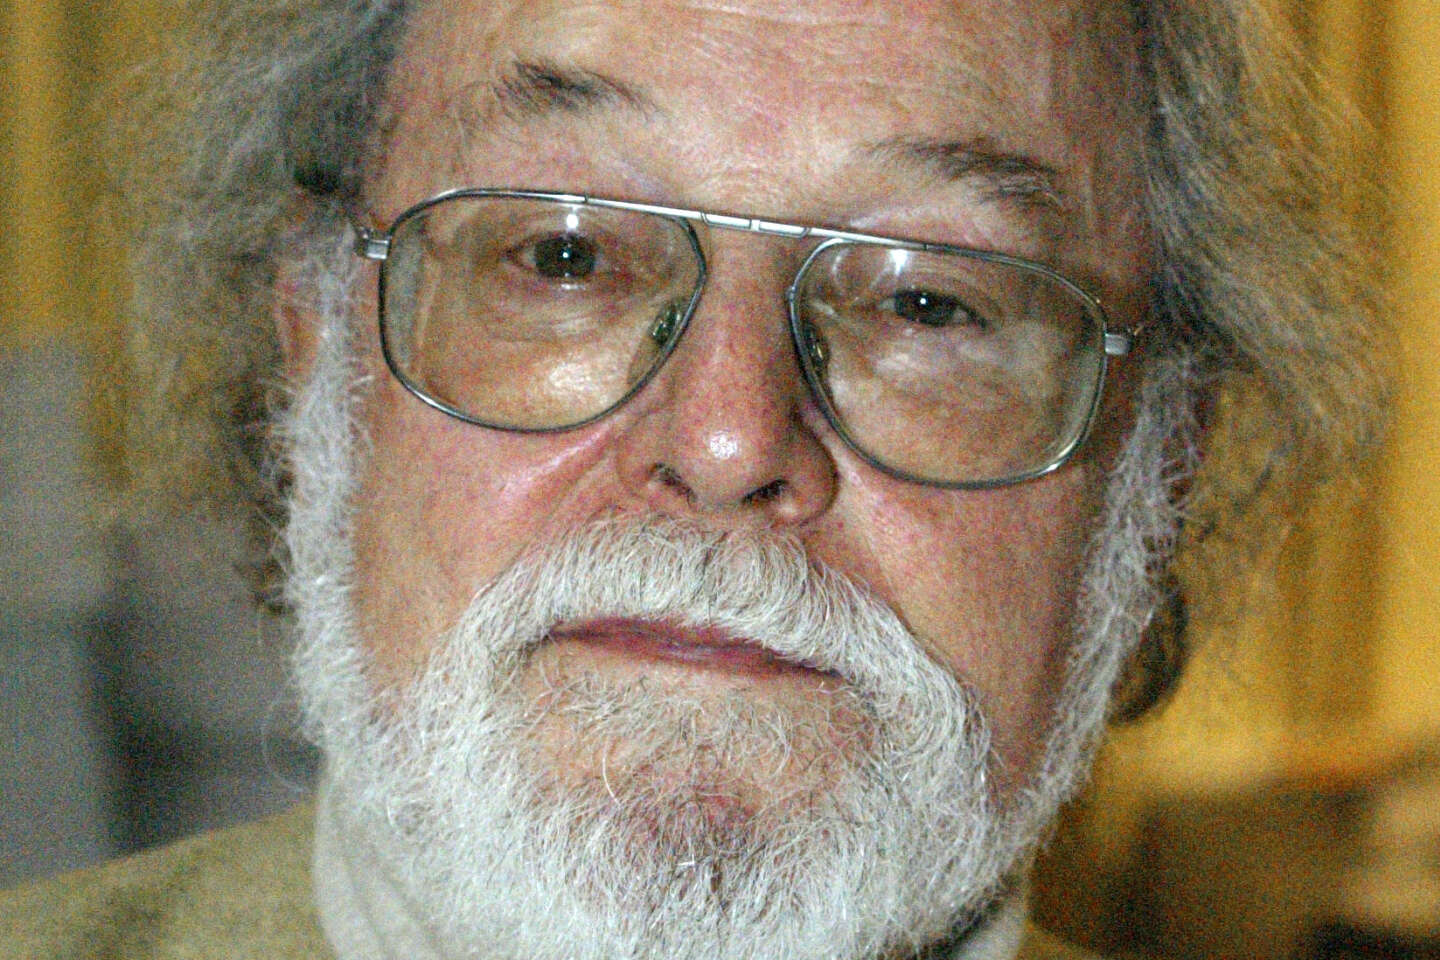 Michel Peyramaure, prolific author of historical novels, died at the age of 101